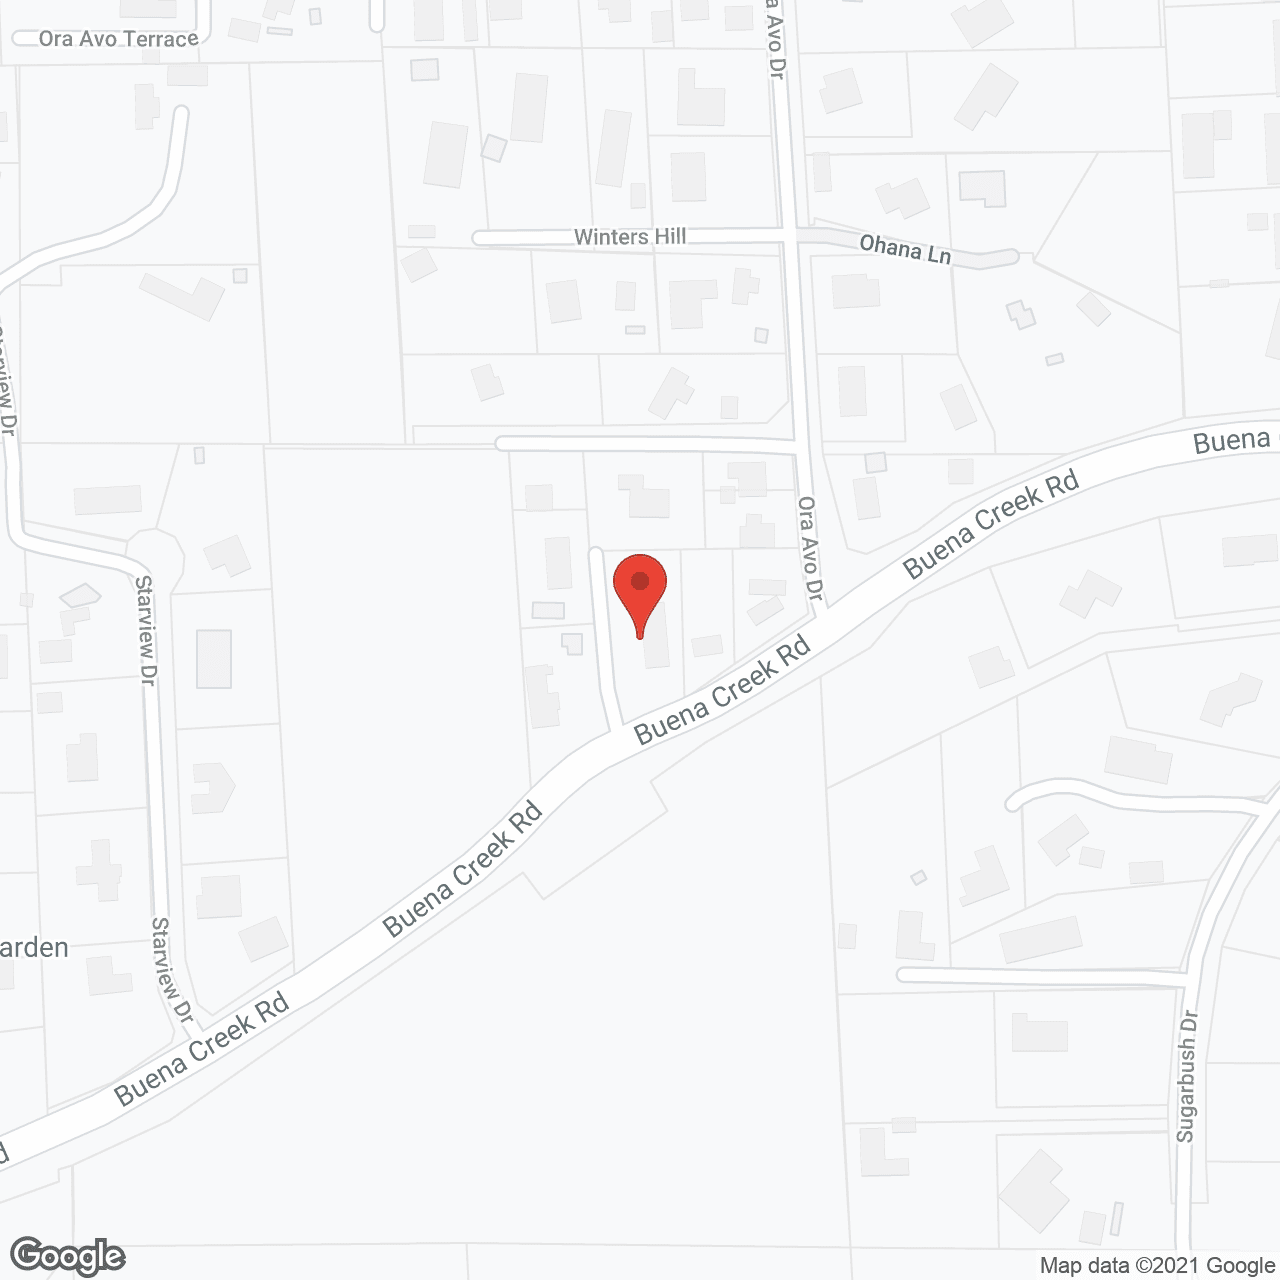 Buena Creek Residential Care in google map